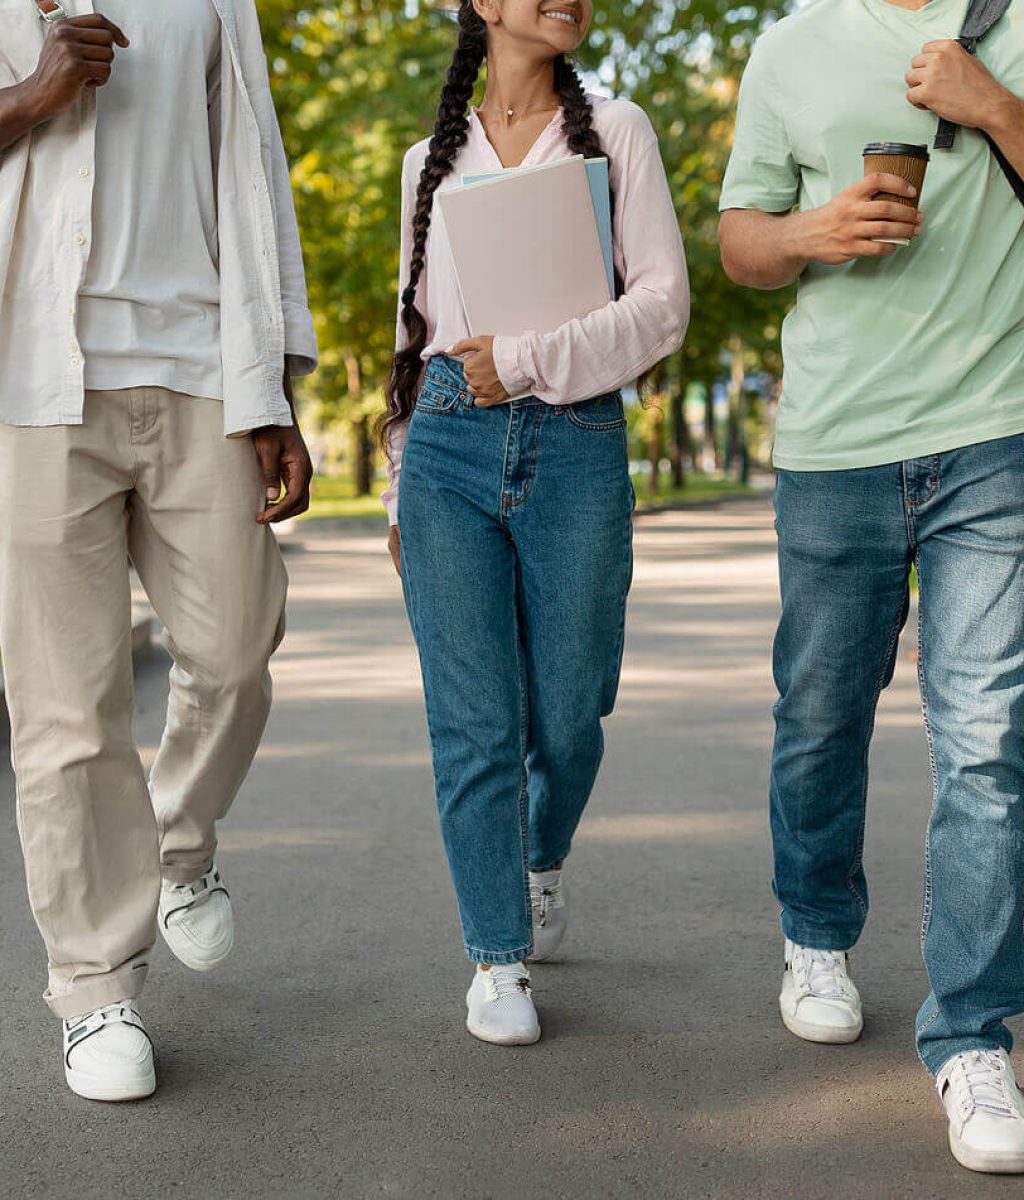 Photo of a two young adult males and one young adult female walking and smiling carrying their backpacks. Struggling with the new transition of being on your own for the first time? Discover how a skilled therapist can help you begin to overcome your anxiety with therapy for young adults in Macon, GA.